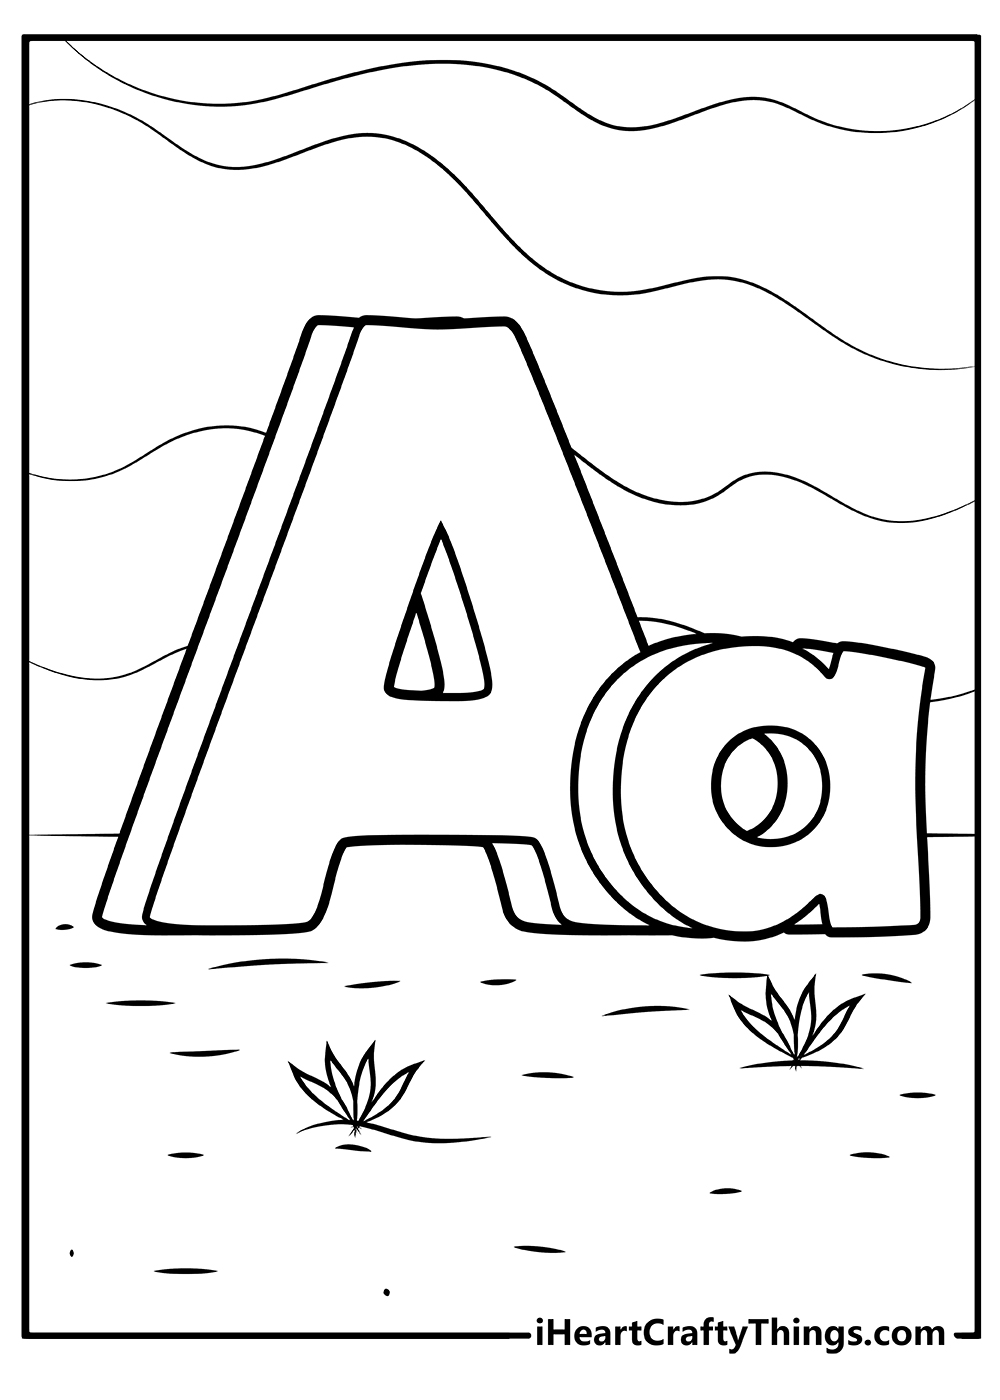 Alphabet Coloring Pages letter A free printable